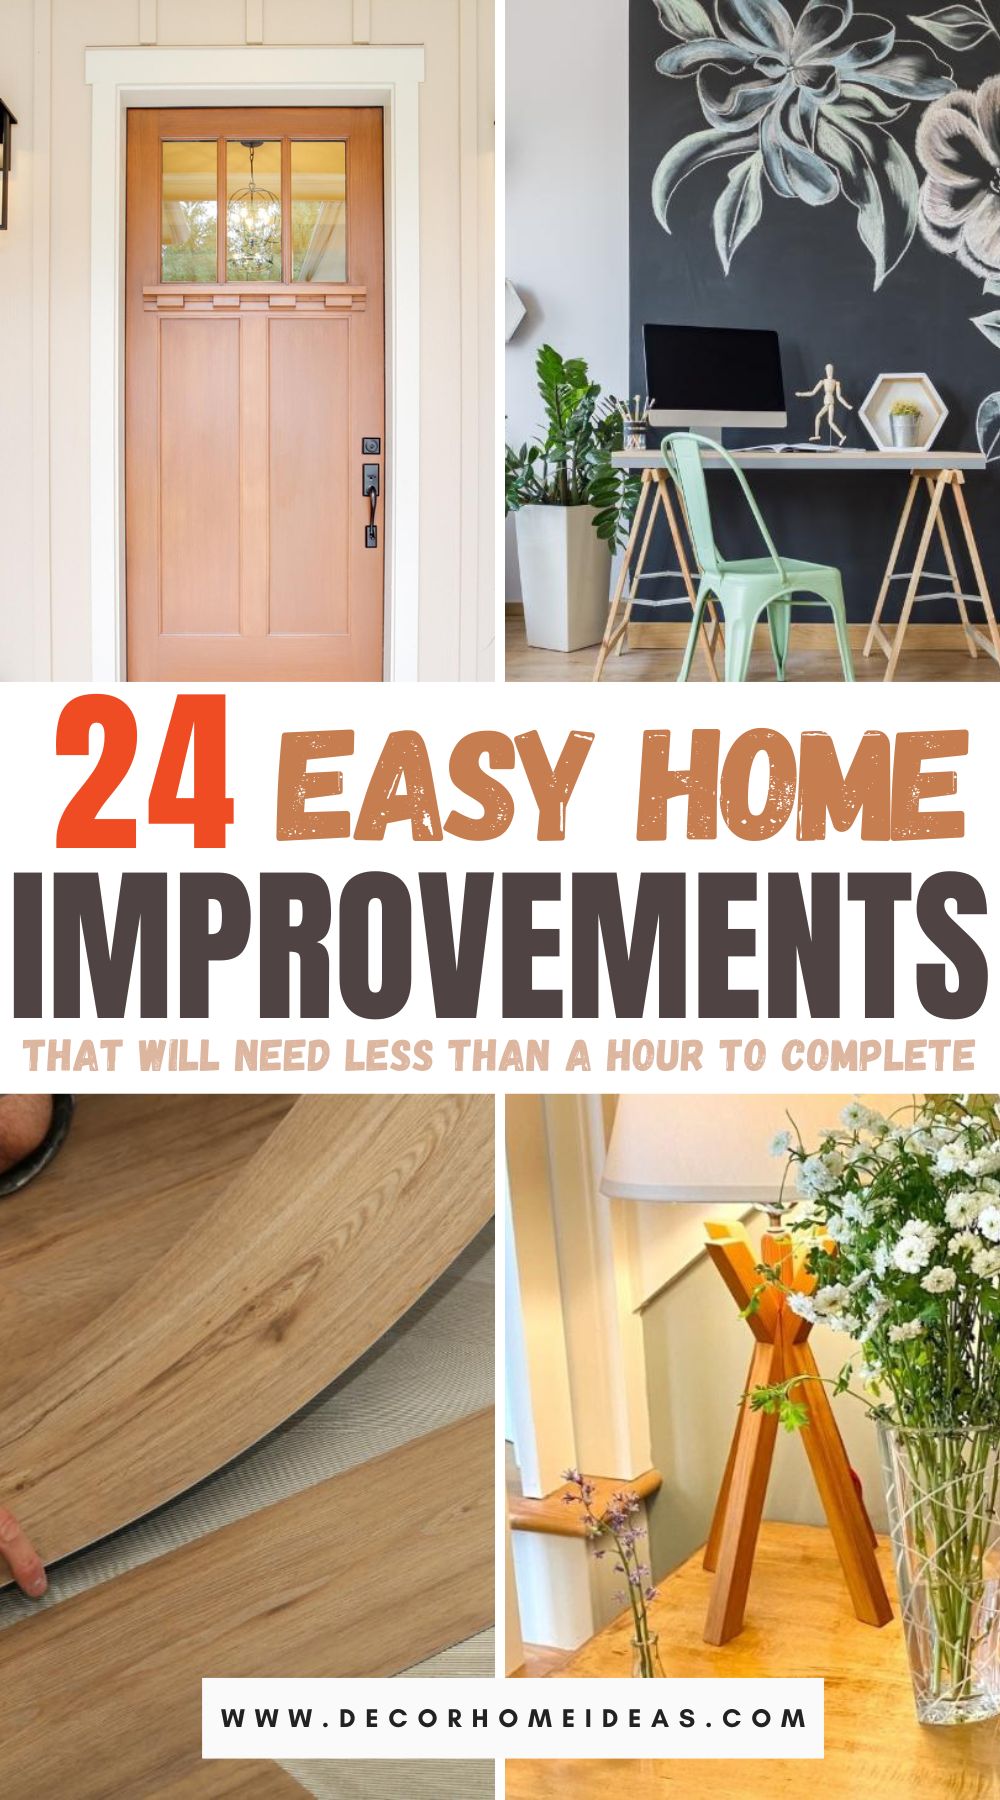 Upgrade your home in under an hour with these quick and effortless improvements. From simple decor tweaks to easy organization hacks, these projects are perfect for busy schedules, delivering instant results without the time commitment.